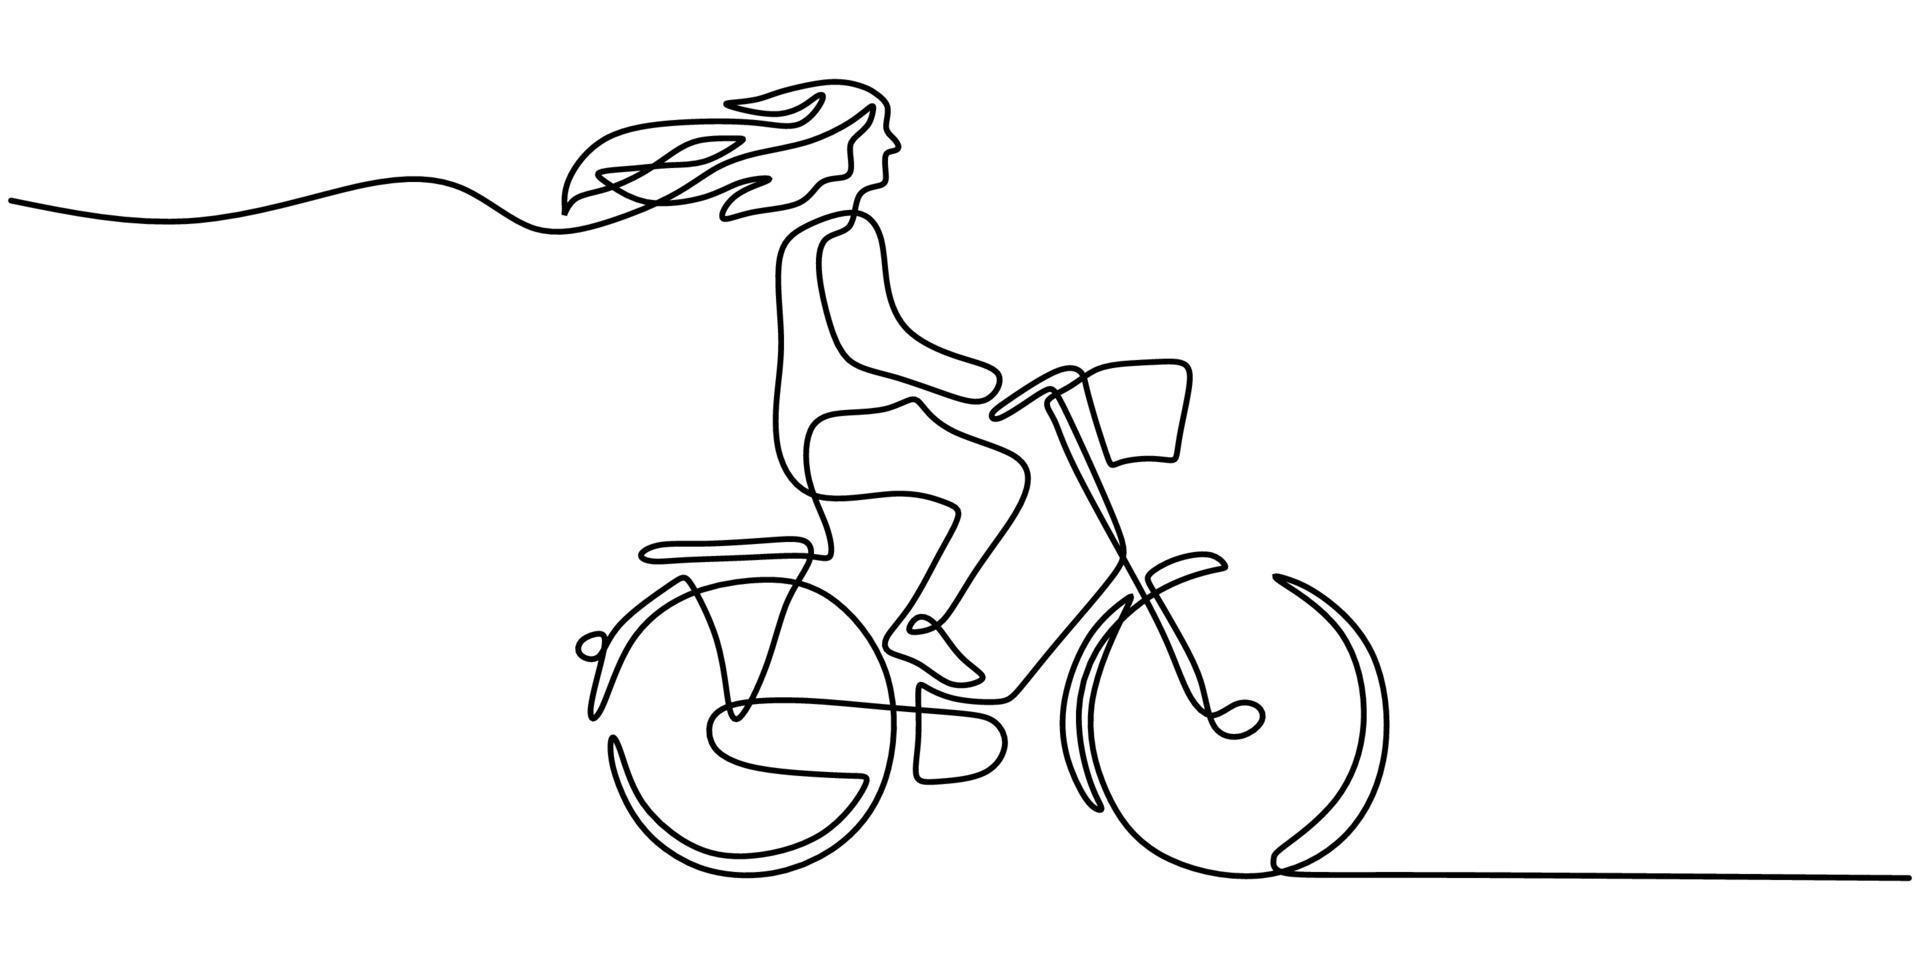 Continuous one single line of girl riding bicycle vector